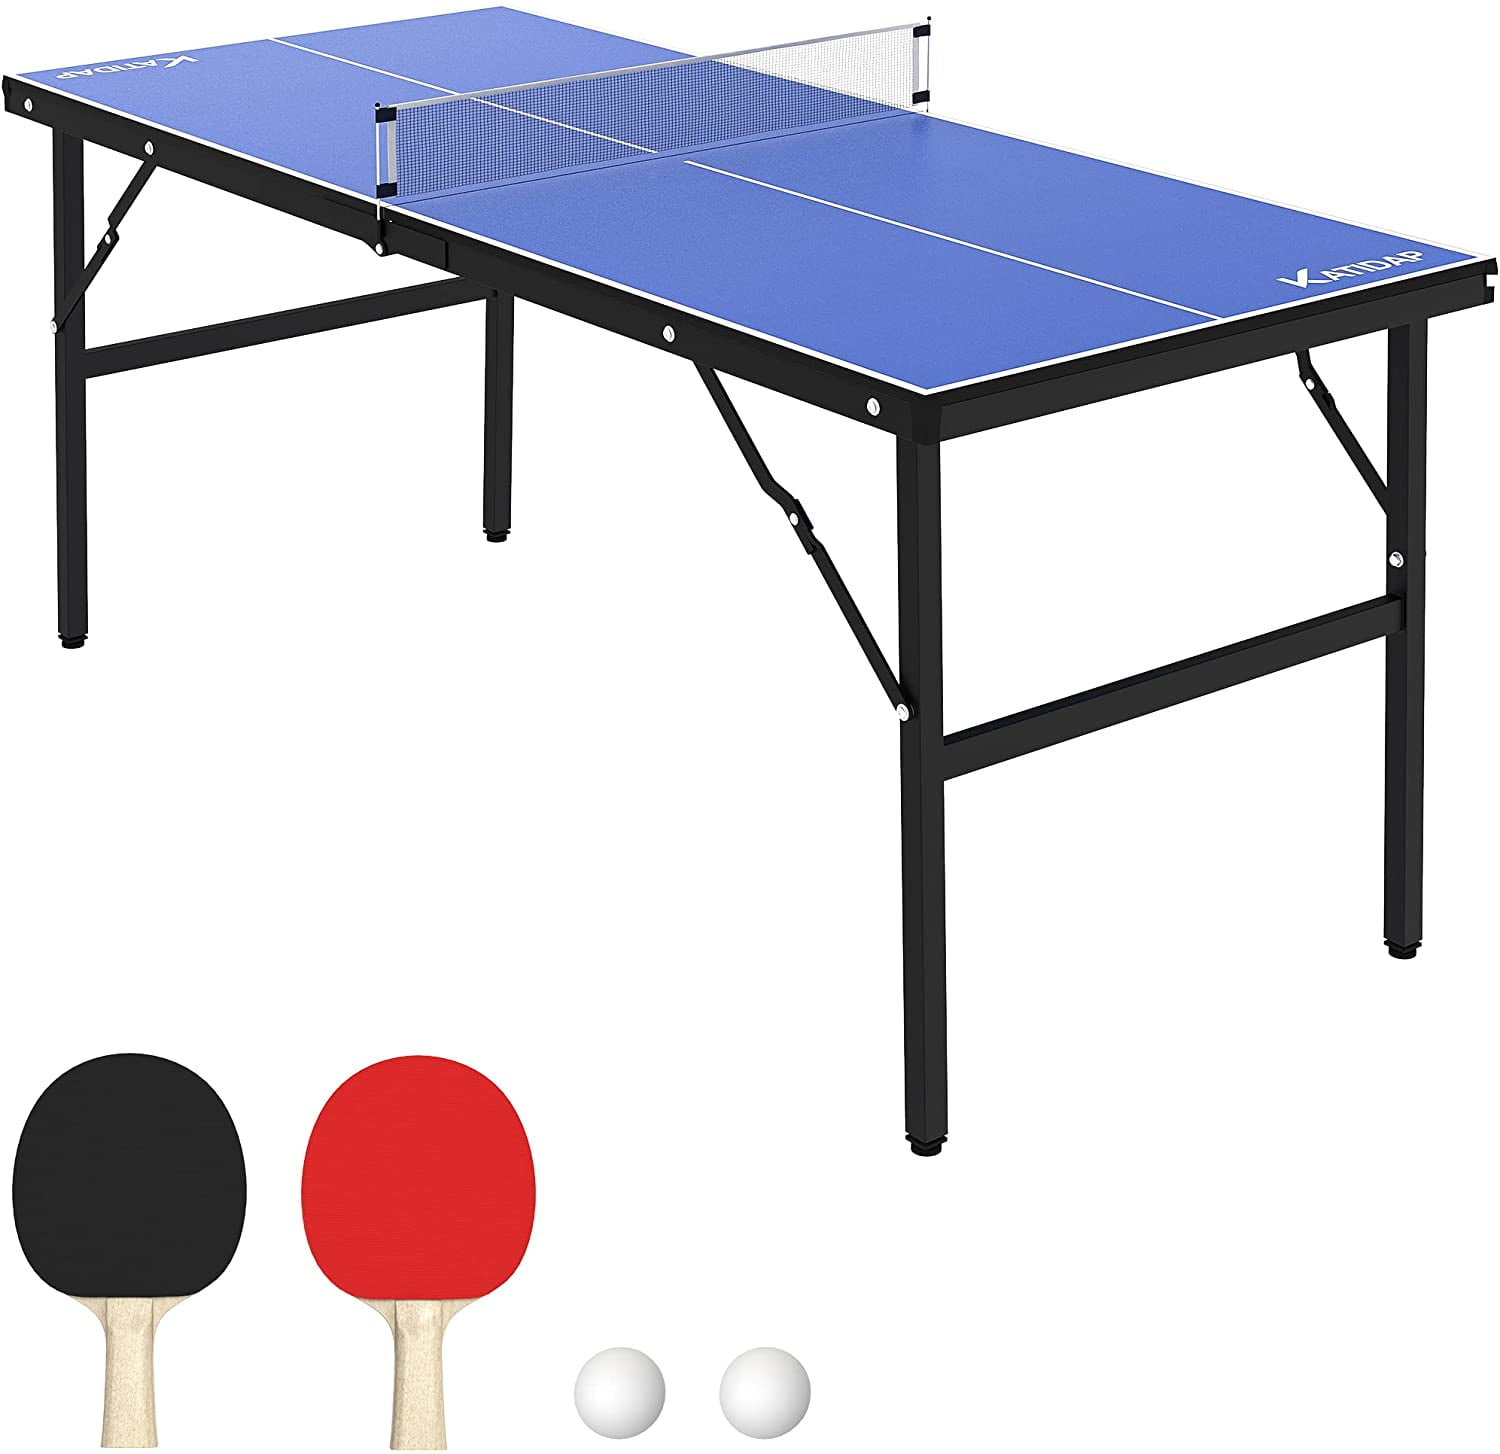 GoSports 6' x 3' Tennis Table Set for sale online 